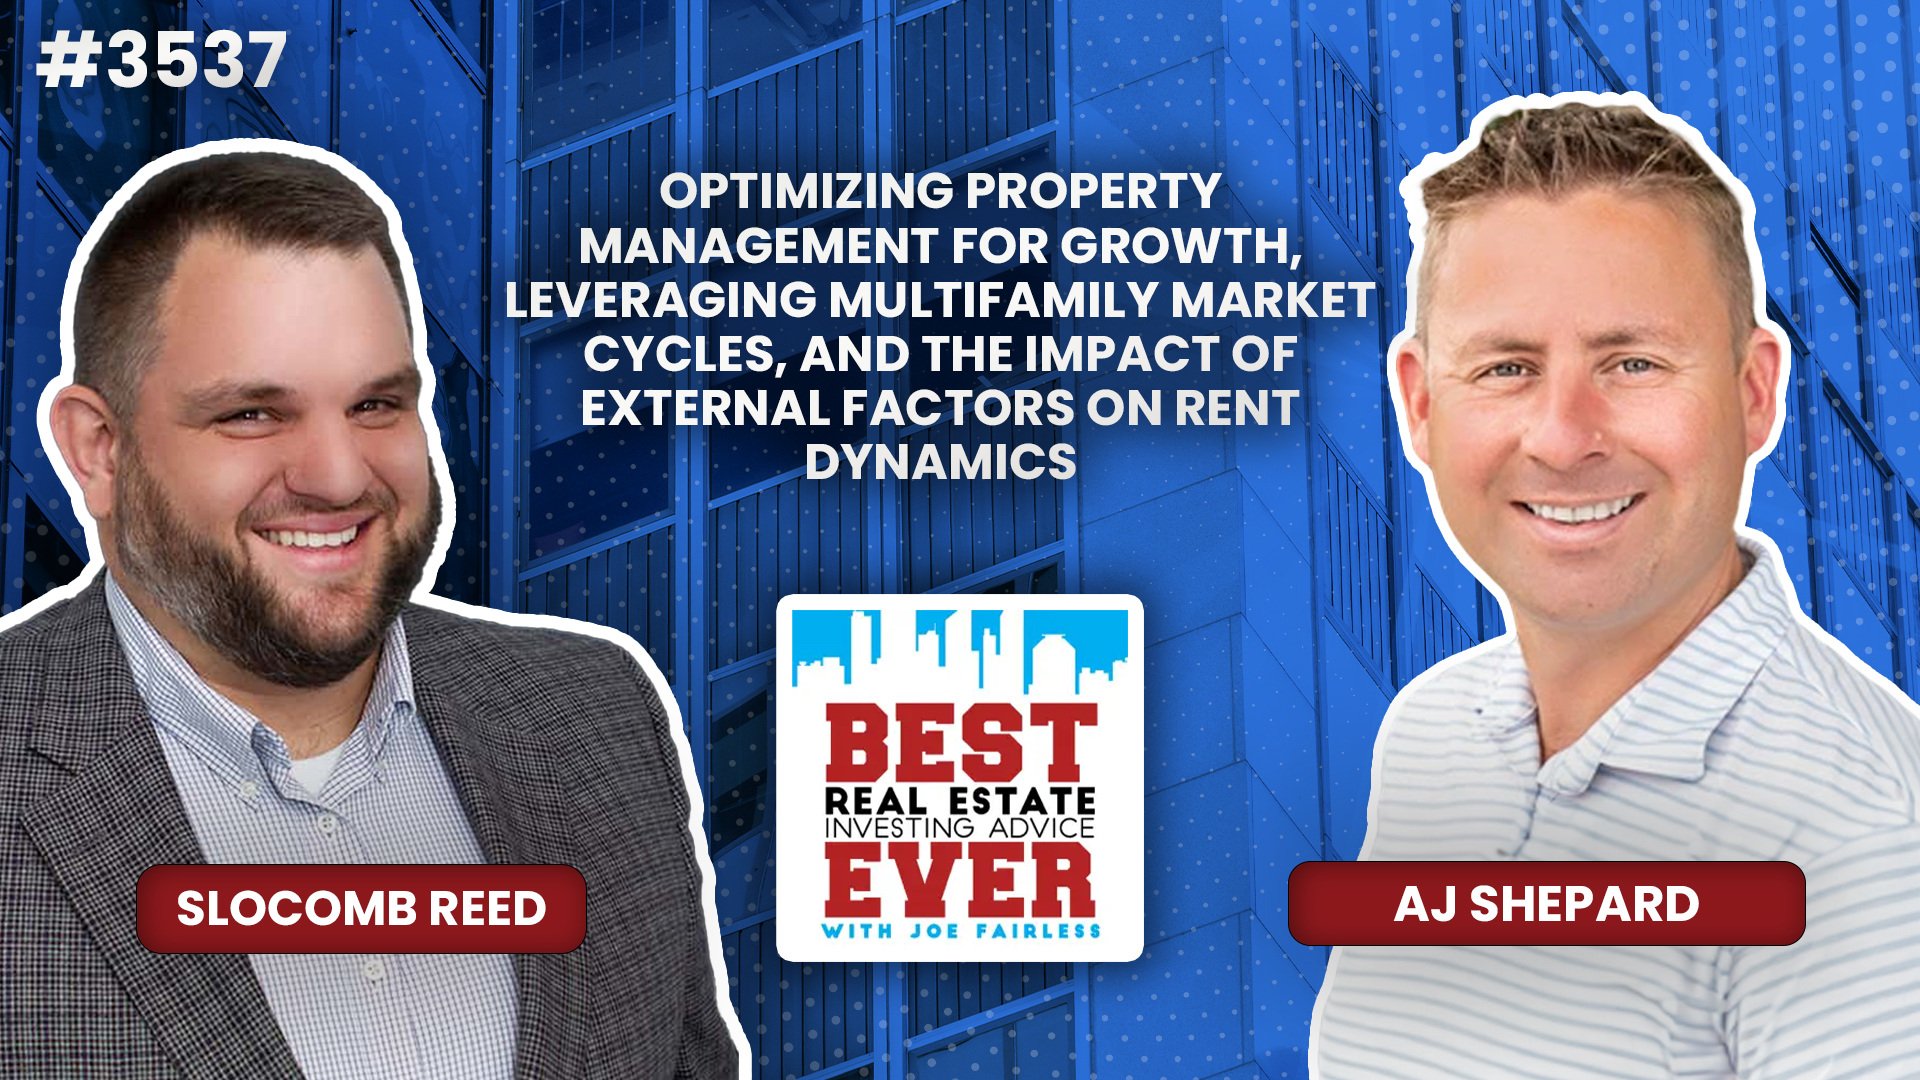 JF3537: Optimizing Property Management for Growth, Leveraging Multifamily Market Cycles, and the Impact of External Factors on Rent Dynamics ft. AJ Shepard